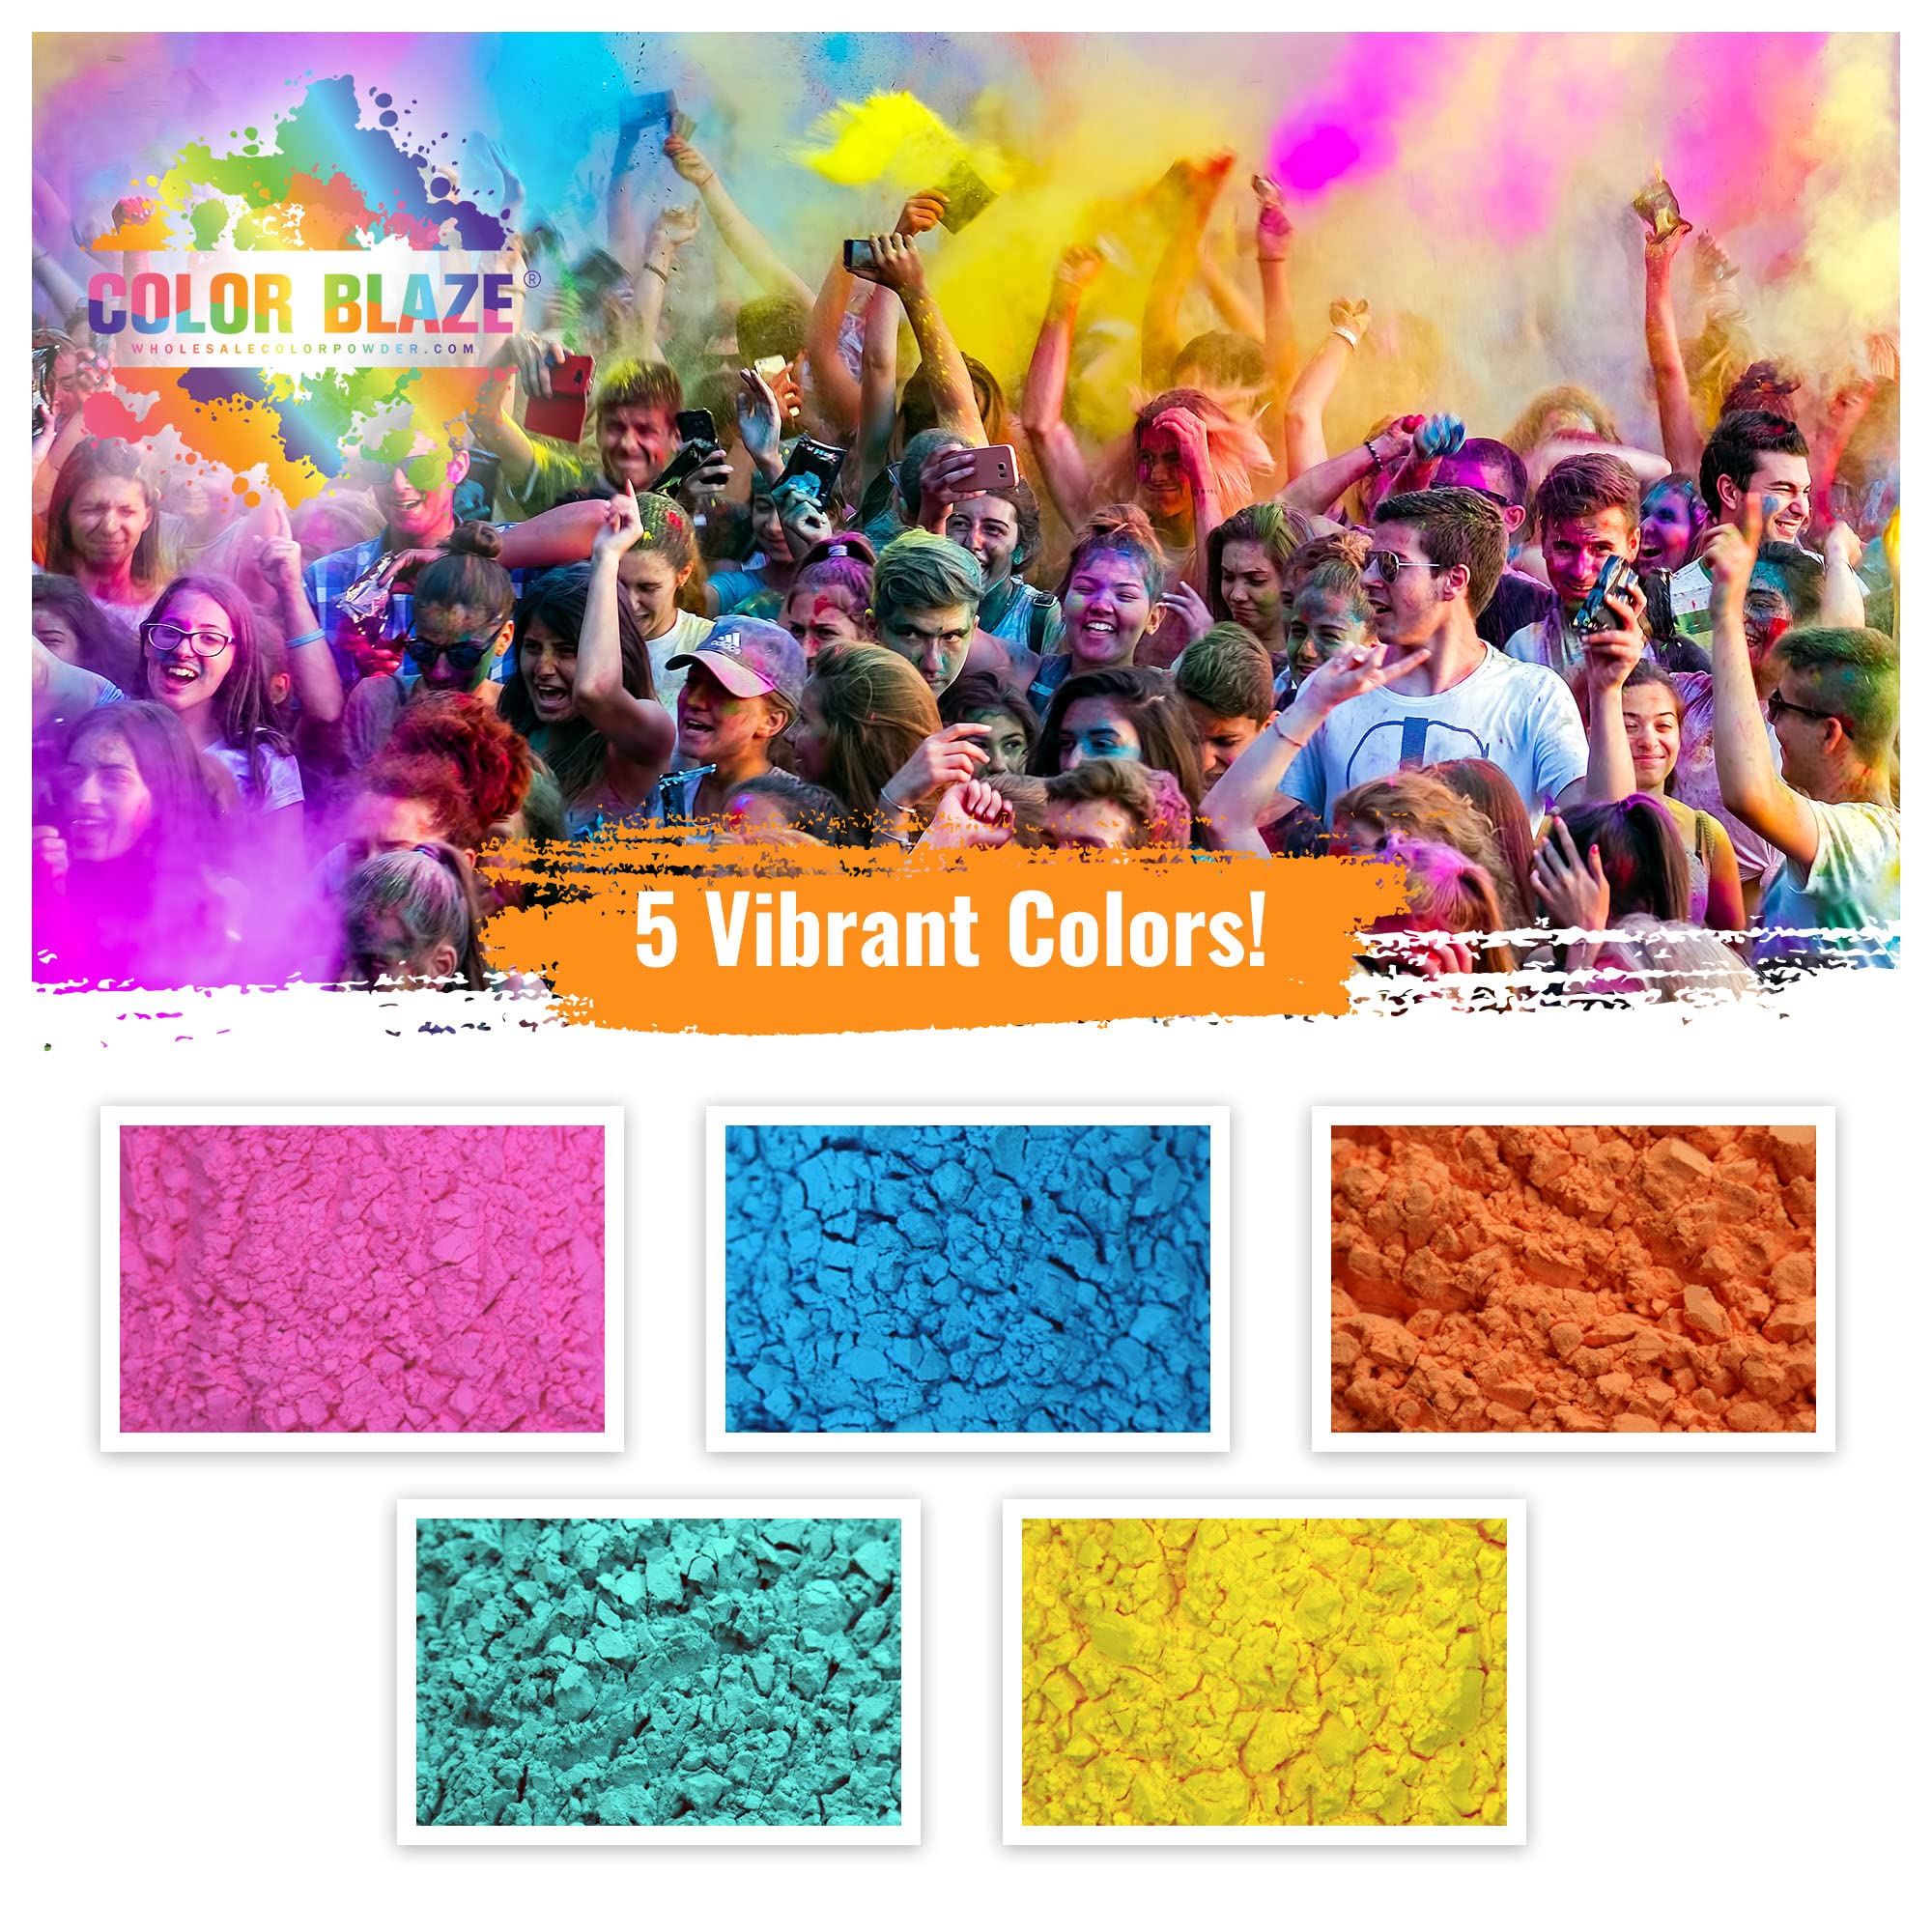 Color Blaze Holi Colored Powder - 5 lbs of Each Color - Pink, Orange, Yellow, Teal, Blue - For Toss, Rangoli, Fun Run, War, Party & Festival - Pack of 5 Bags - 25 Pounds in Bulk